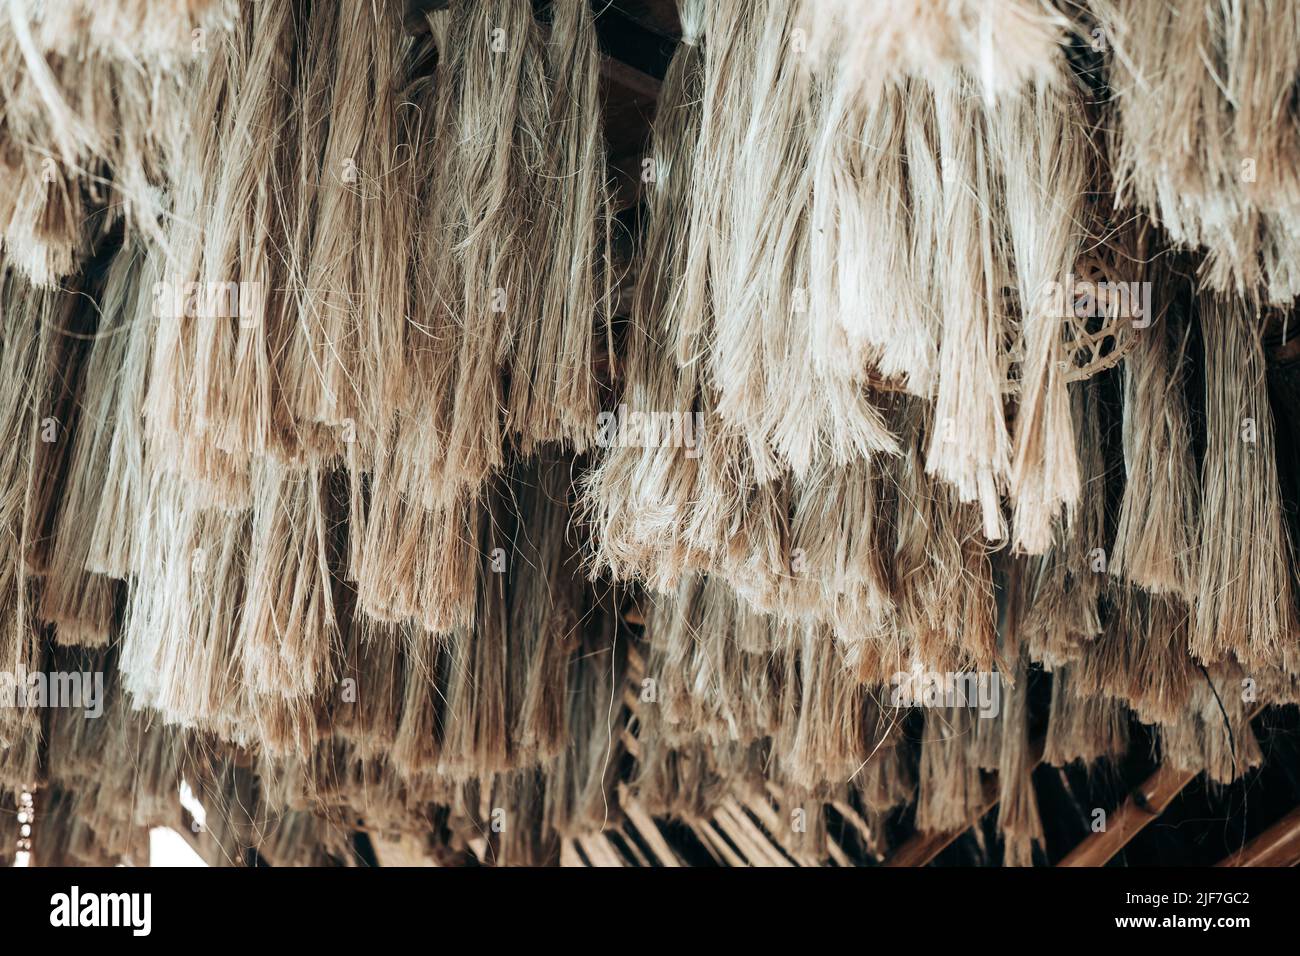 Array of hanging Abaca plant fibers, a natural leaf fiber, also called Manila hemp or Musa textilis from Banana tree leafstalk native to Philipines. A Stock Photo